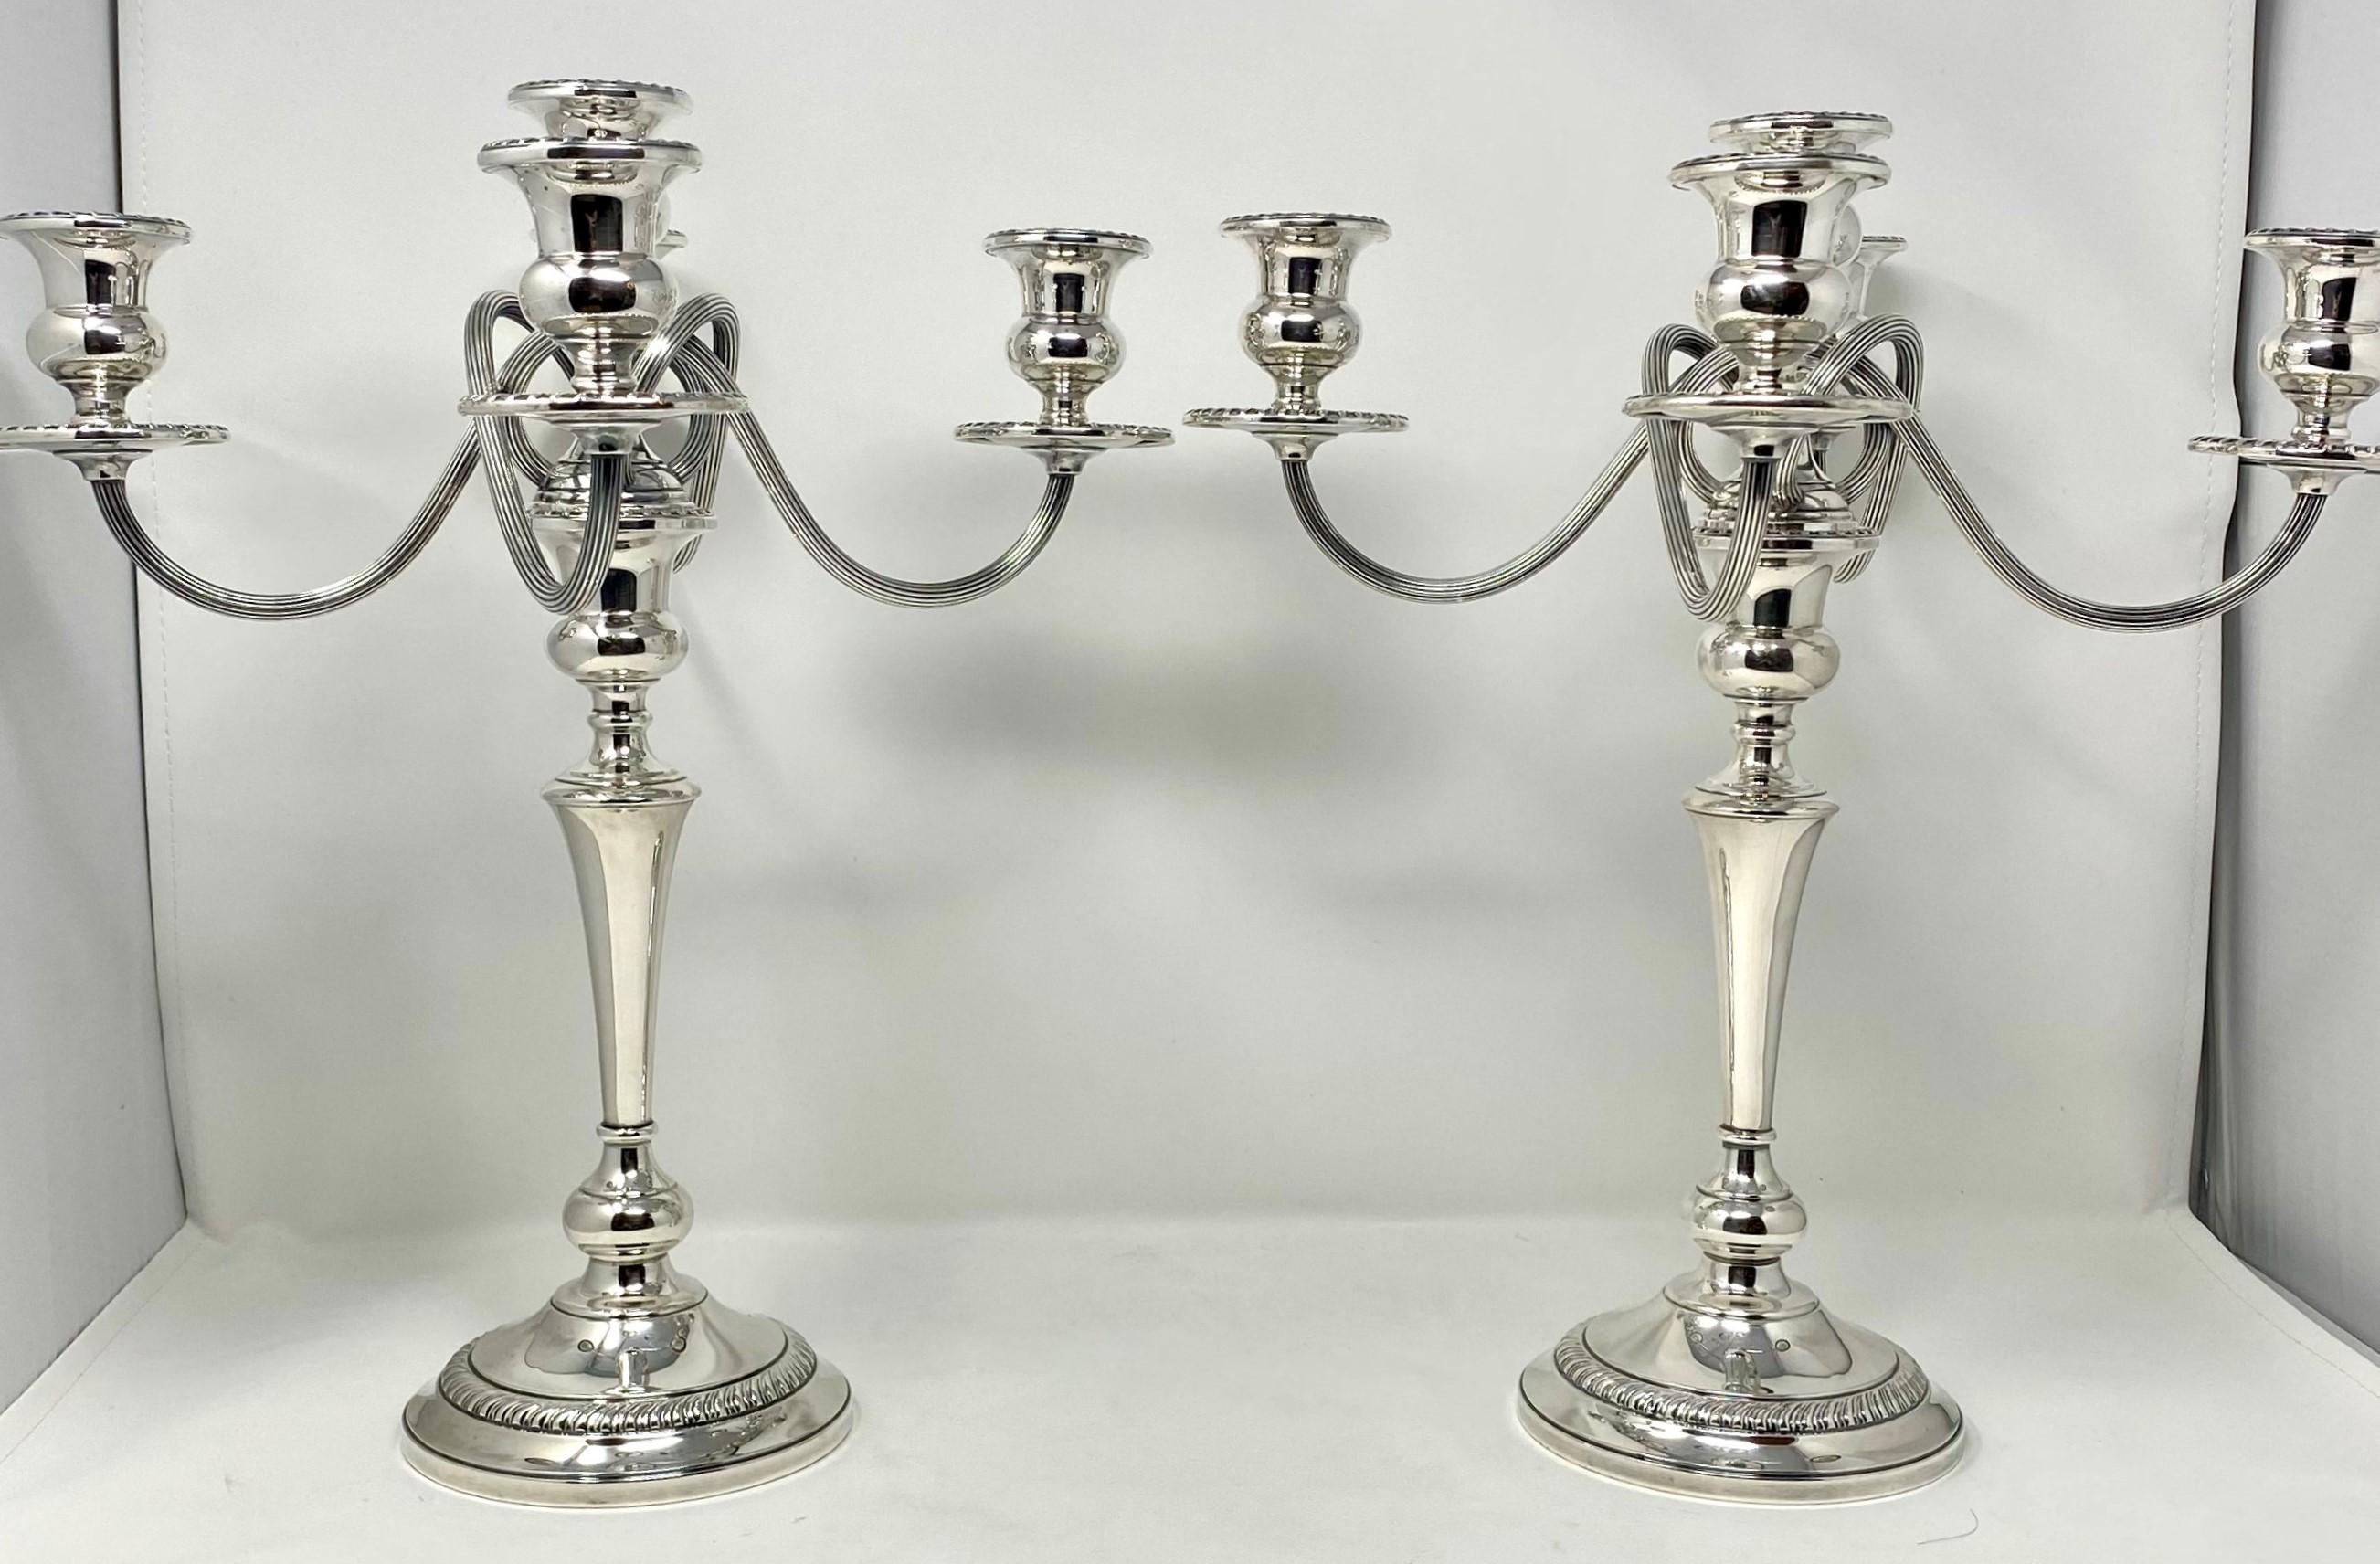 Pair of Estate American Hallmarked Sterling Silver Candelabra, Circa 1940's.
Can be converted from 5-Cup Candelabra to Single-Cup Candlesticks.